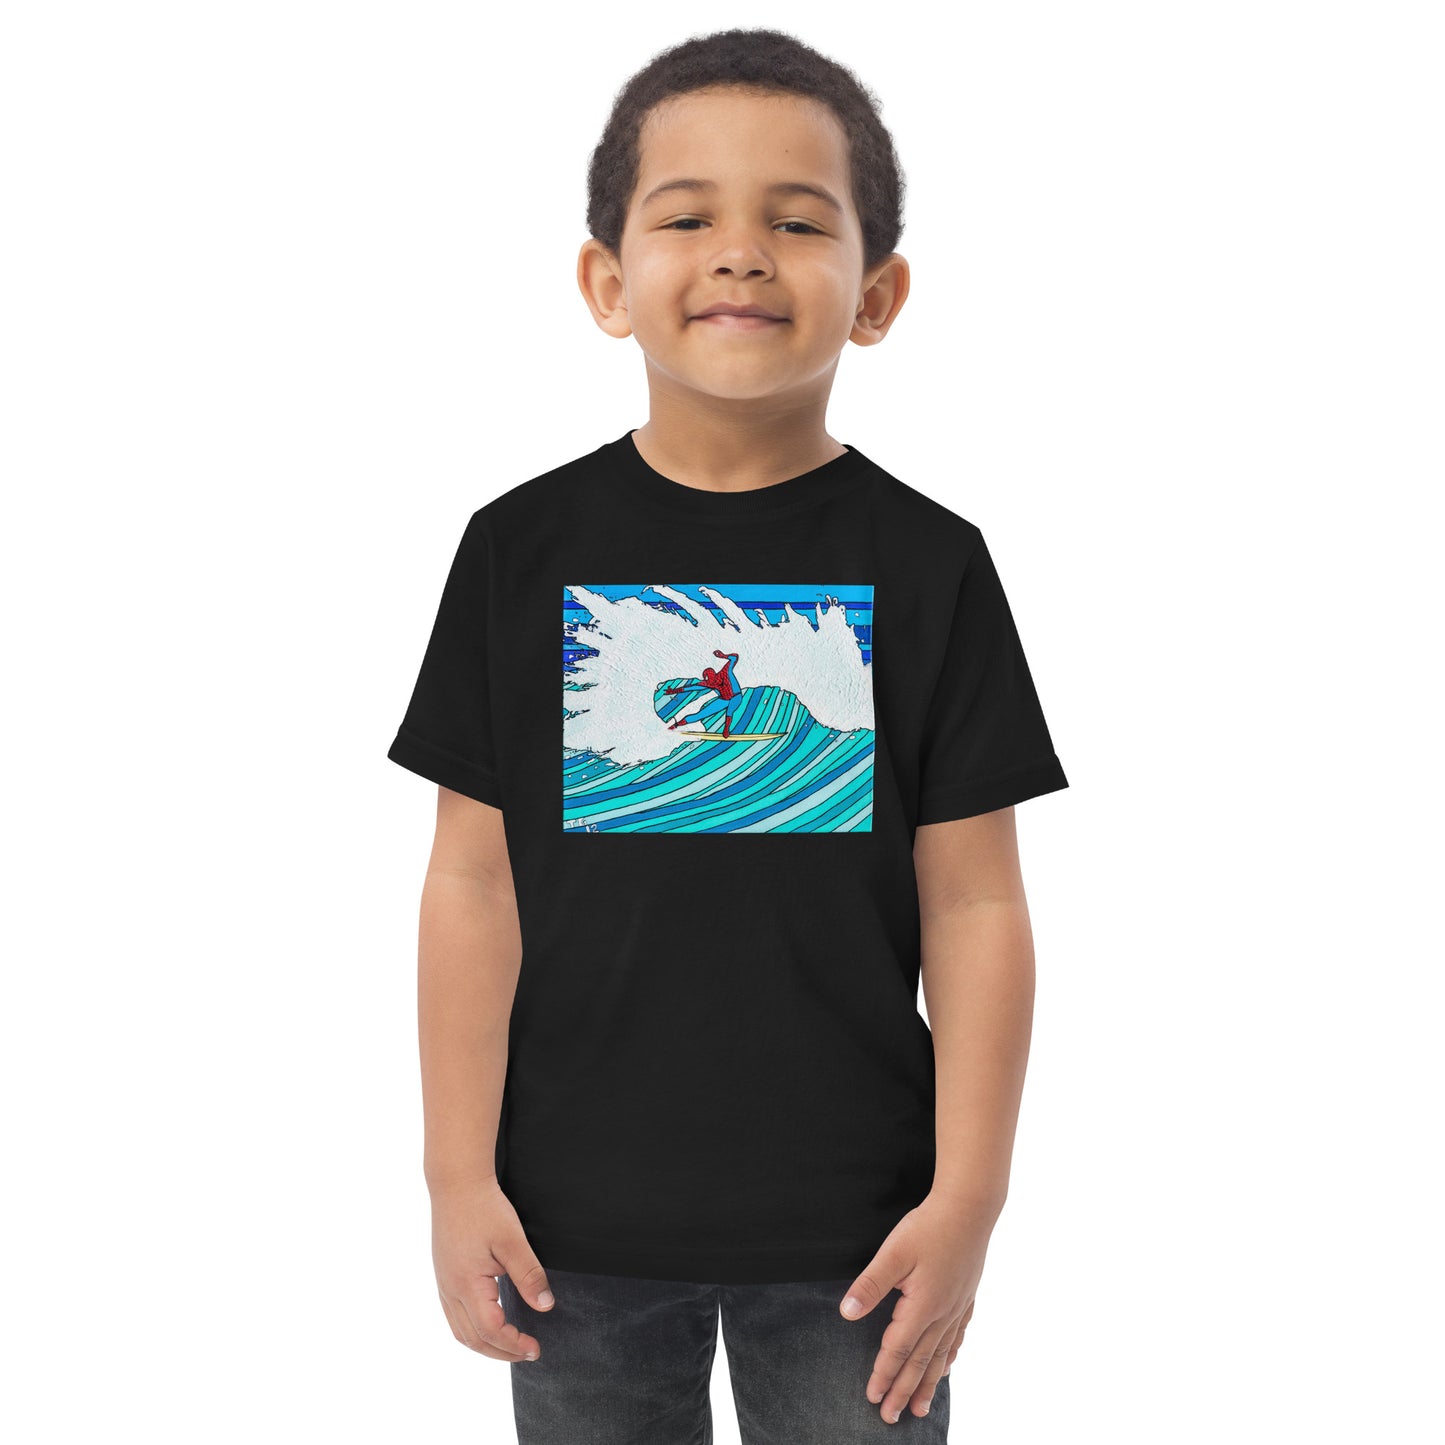 Spidey Style - Toddler jersey t-shirt